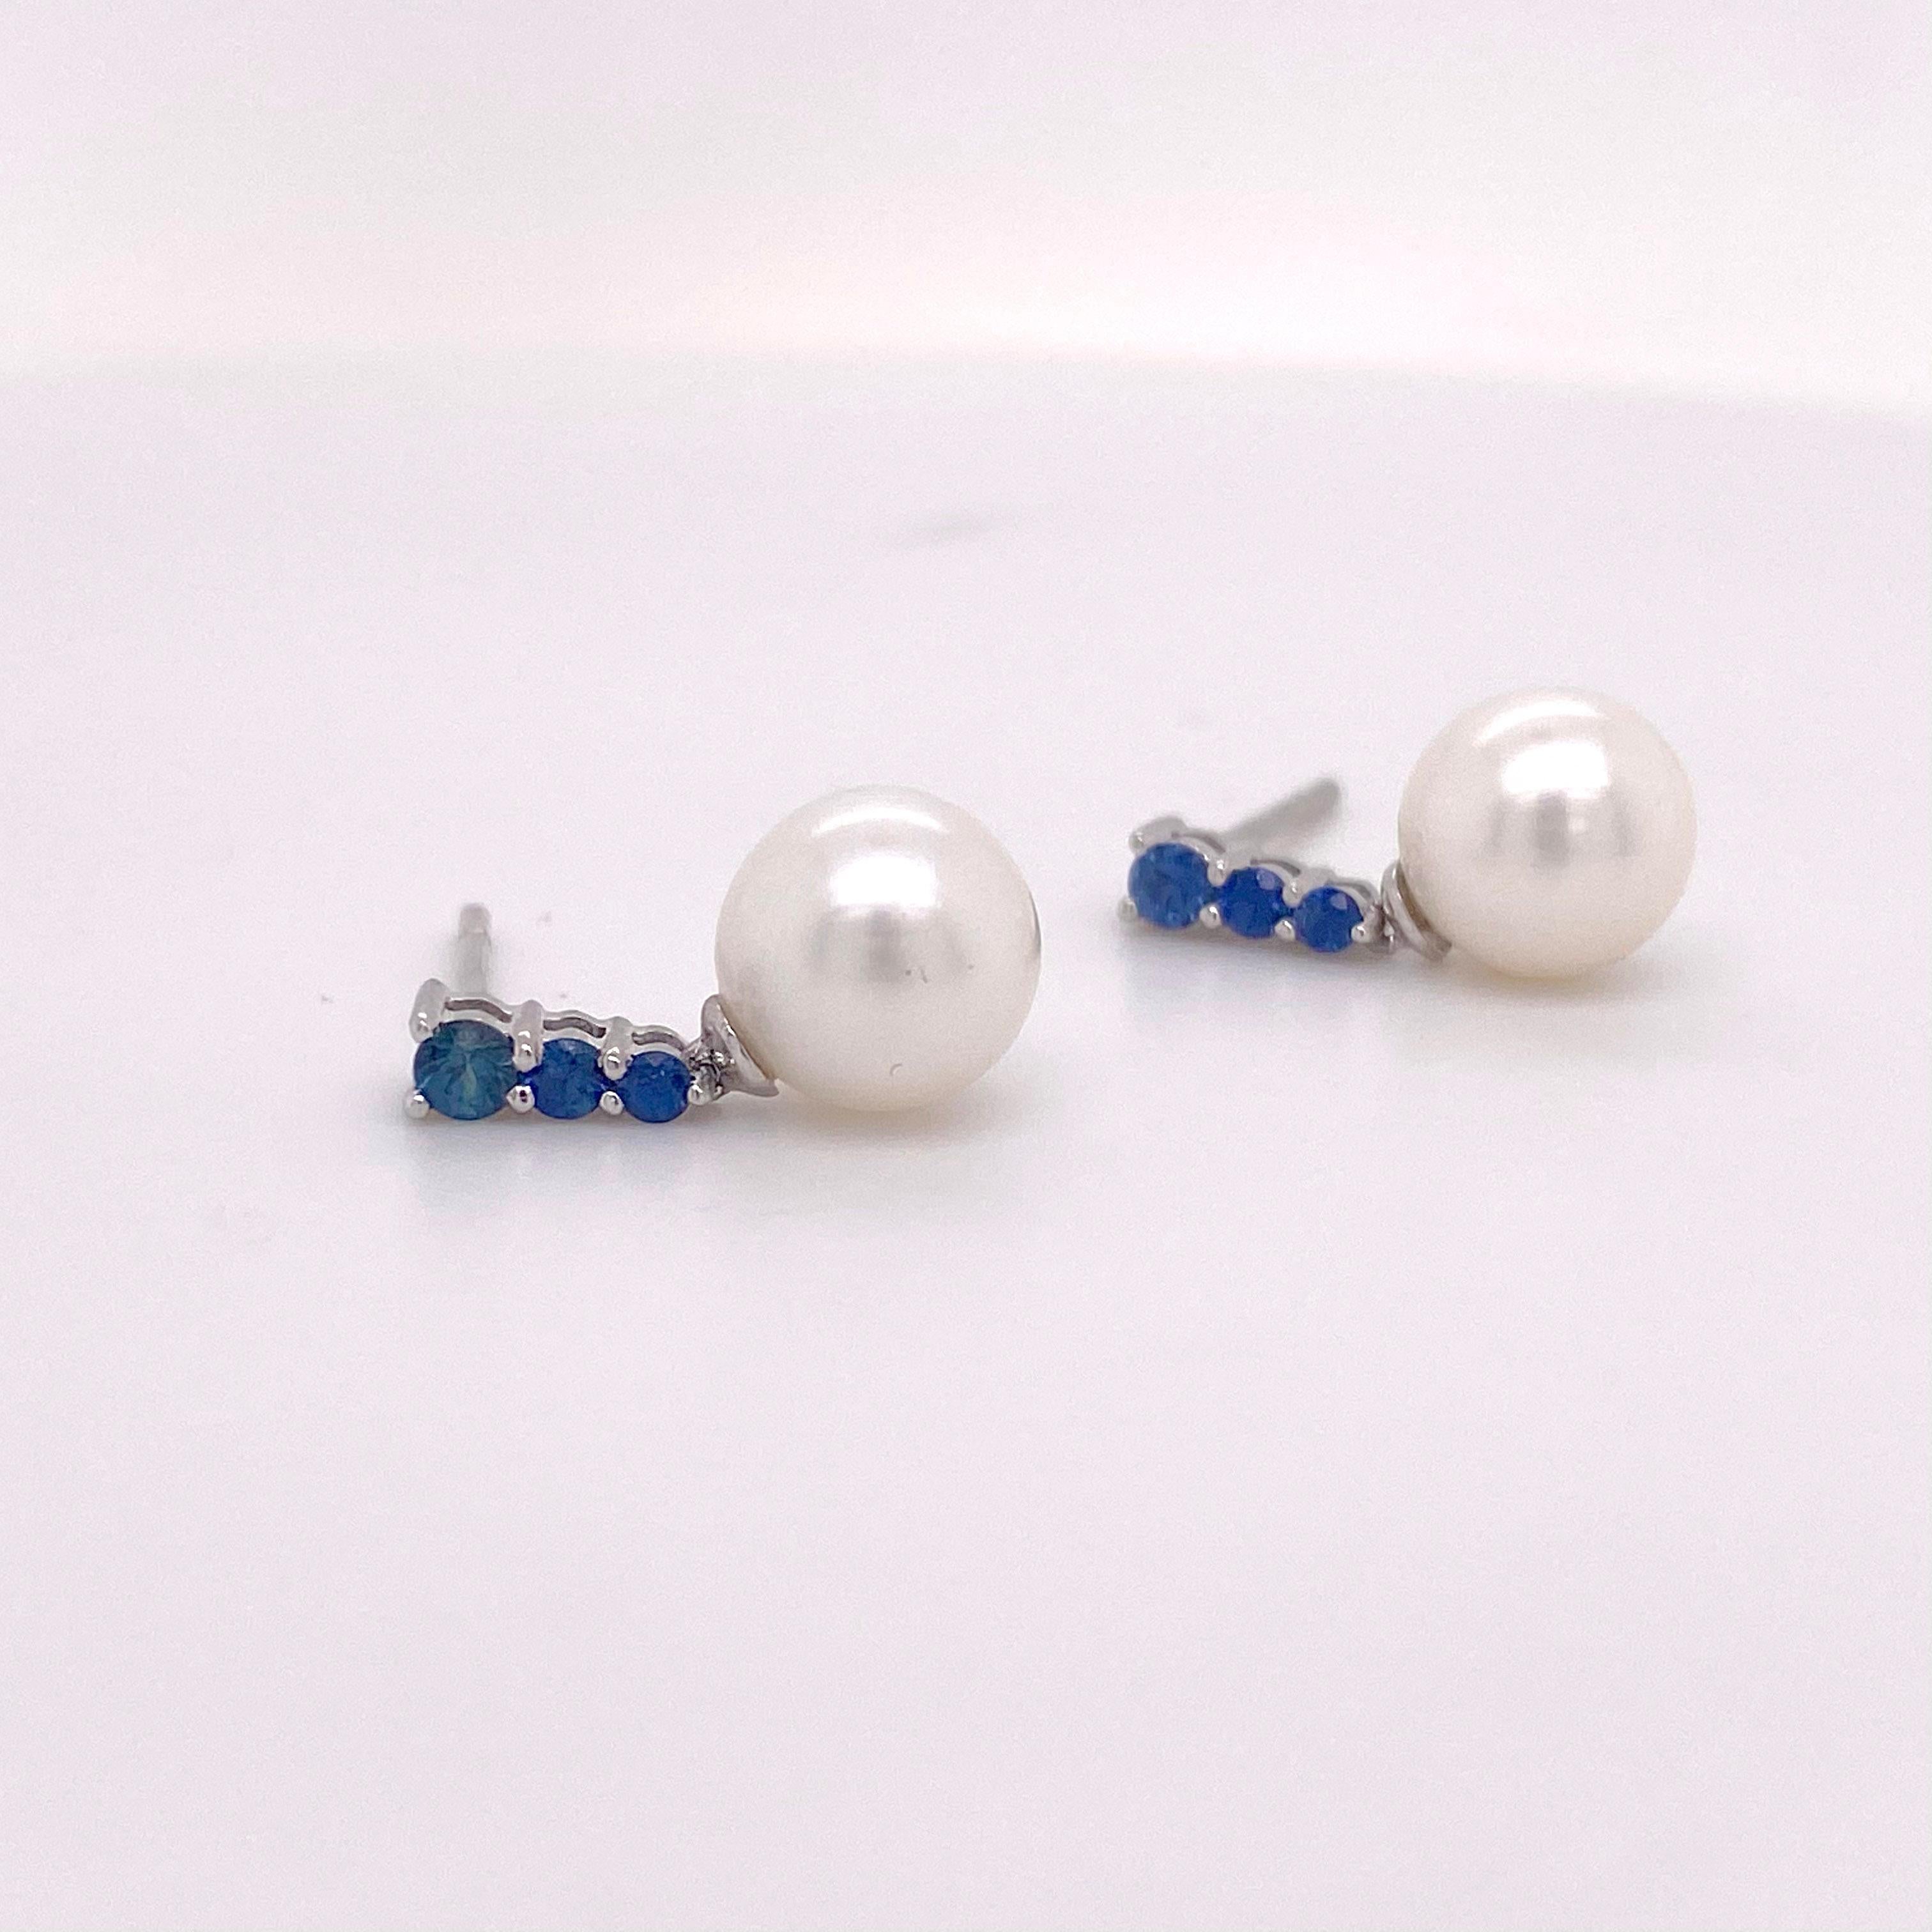 Modern Sapphire Pearl Earring, Earring Drops in White Gold, Event or Everyday Earrings